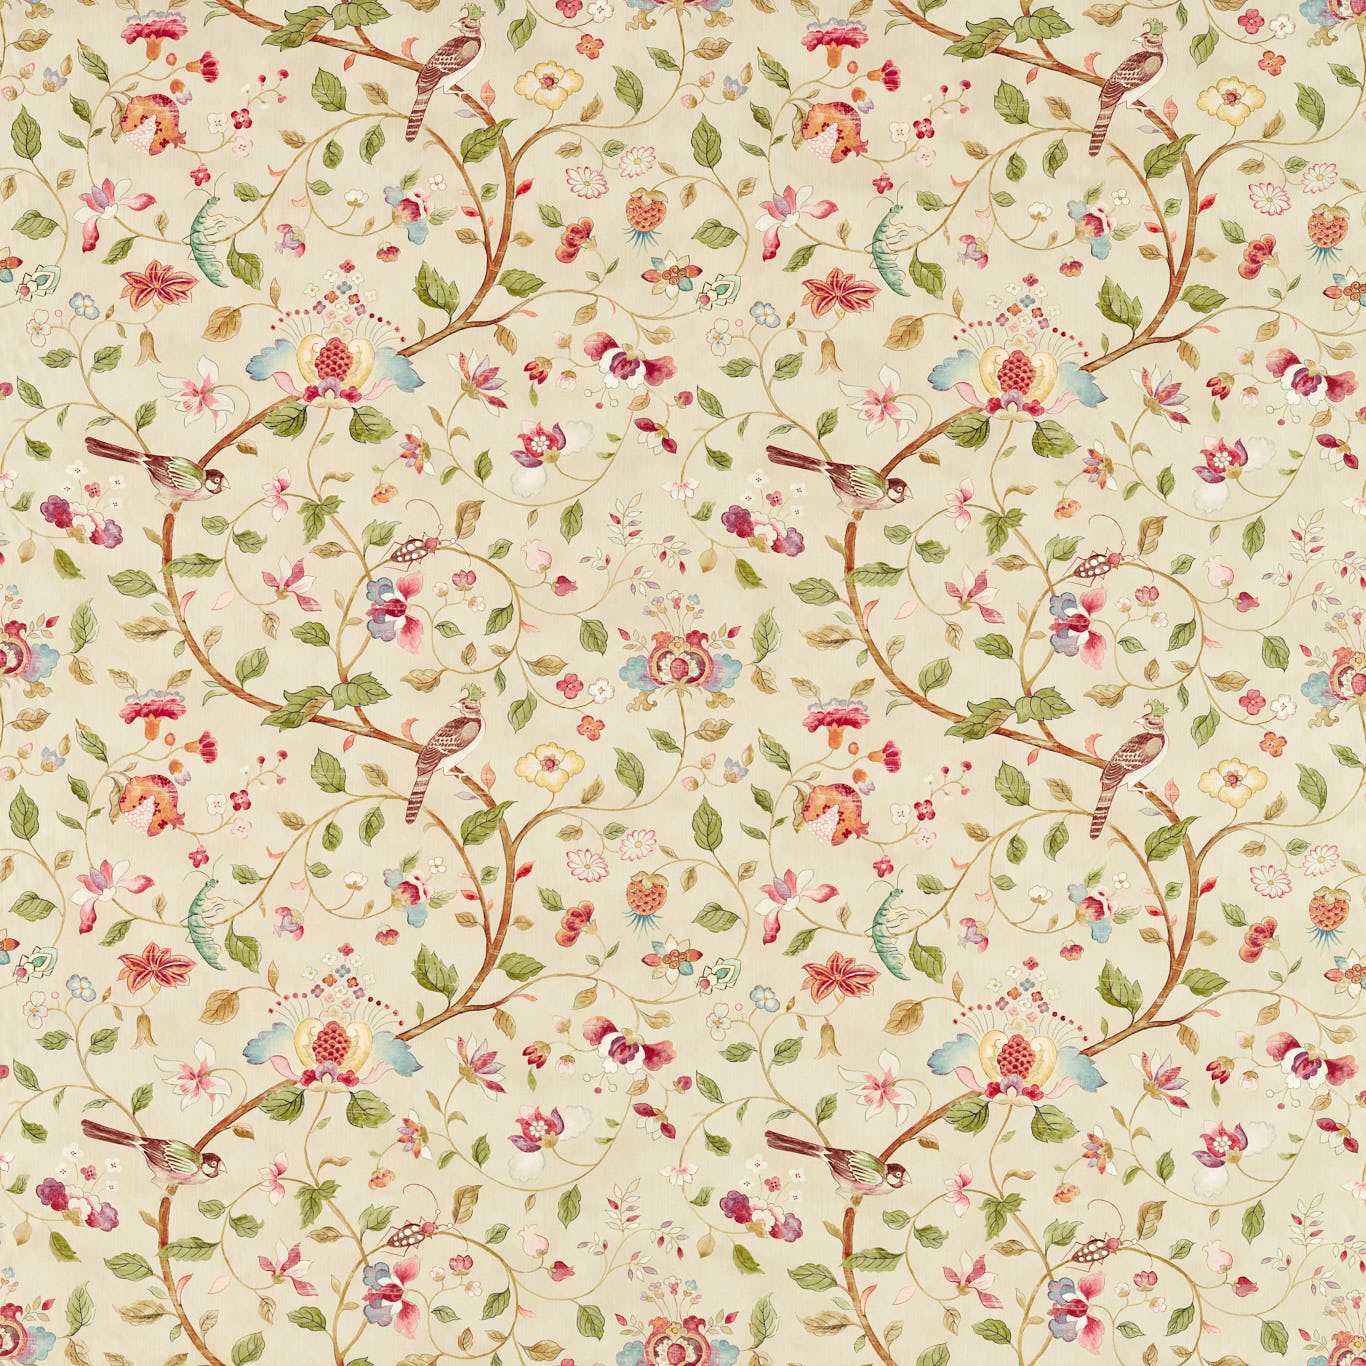 Aril’s Garden Olive/Mulberry Fabric by SAN